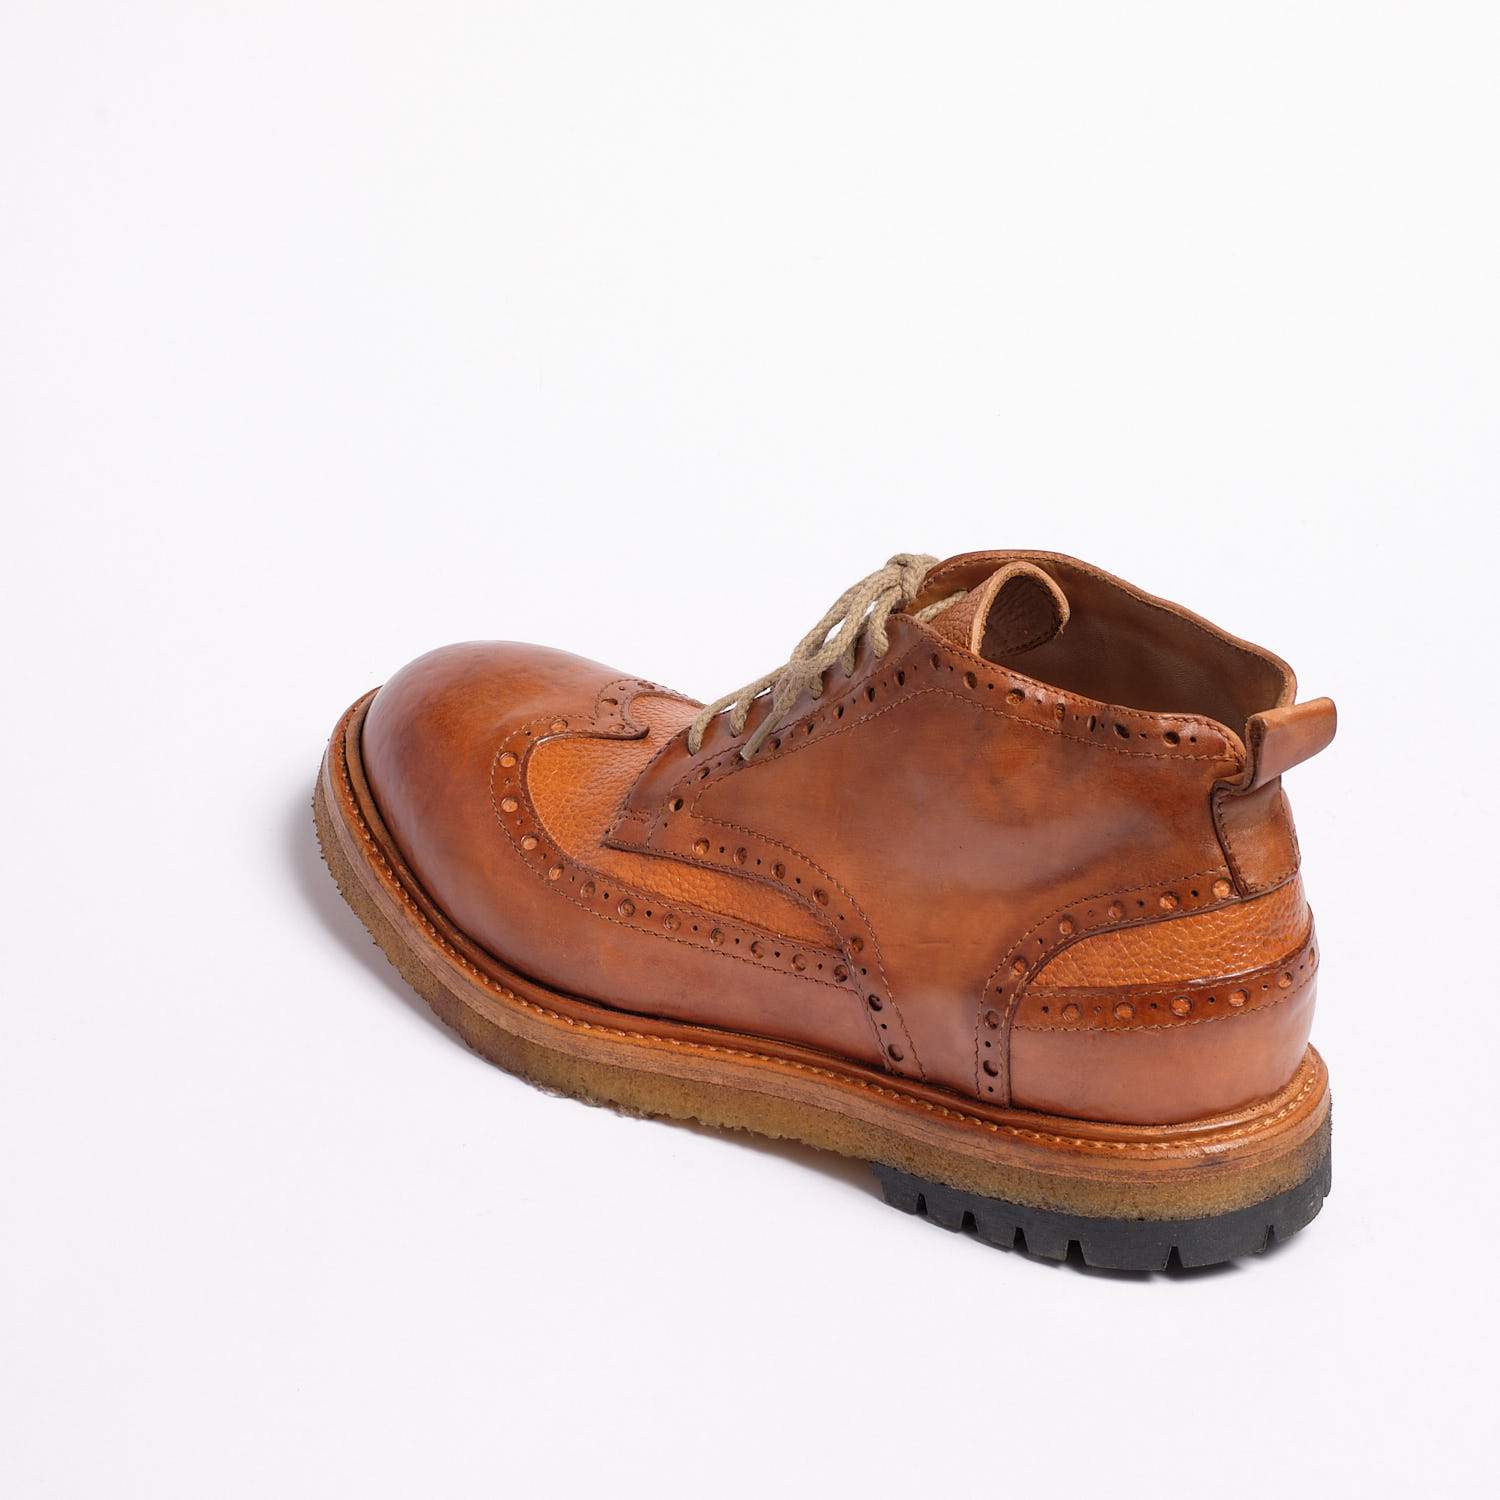 Ian Laced Mid Shoes Natural Vacchetta leather cuoio